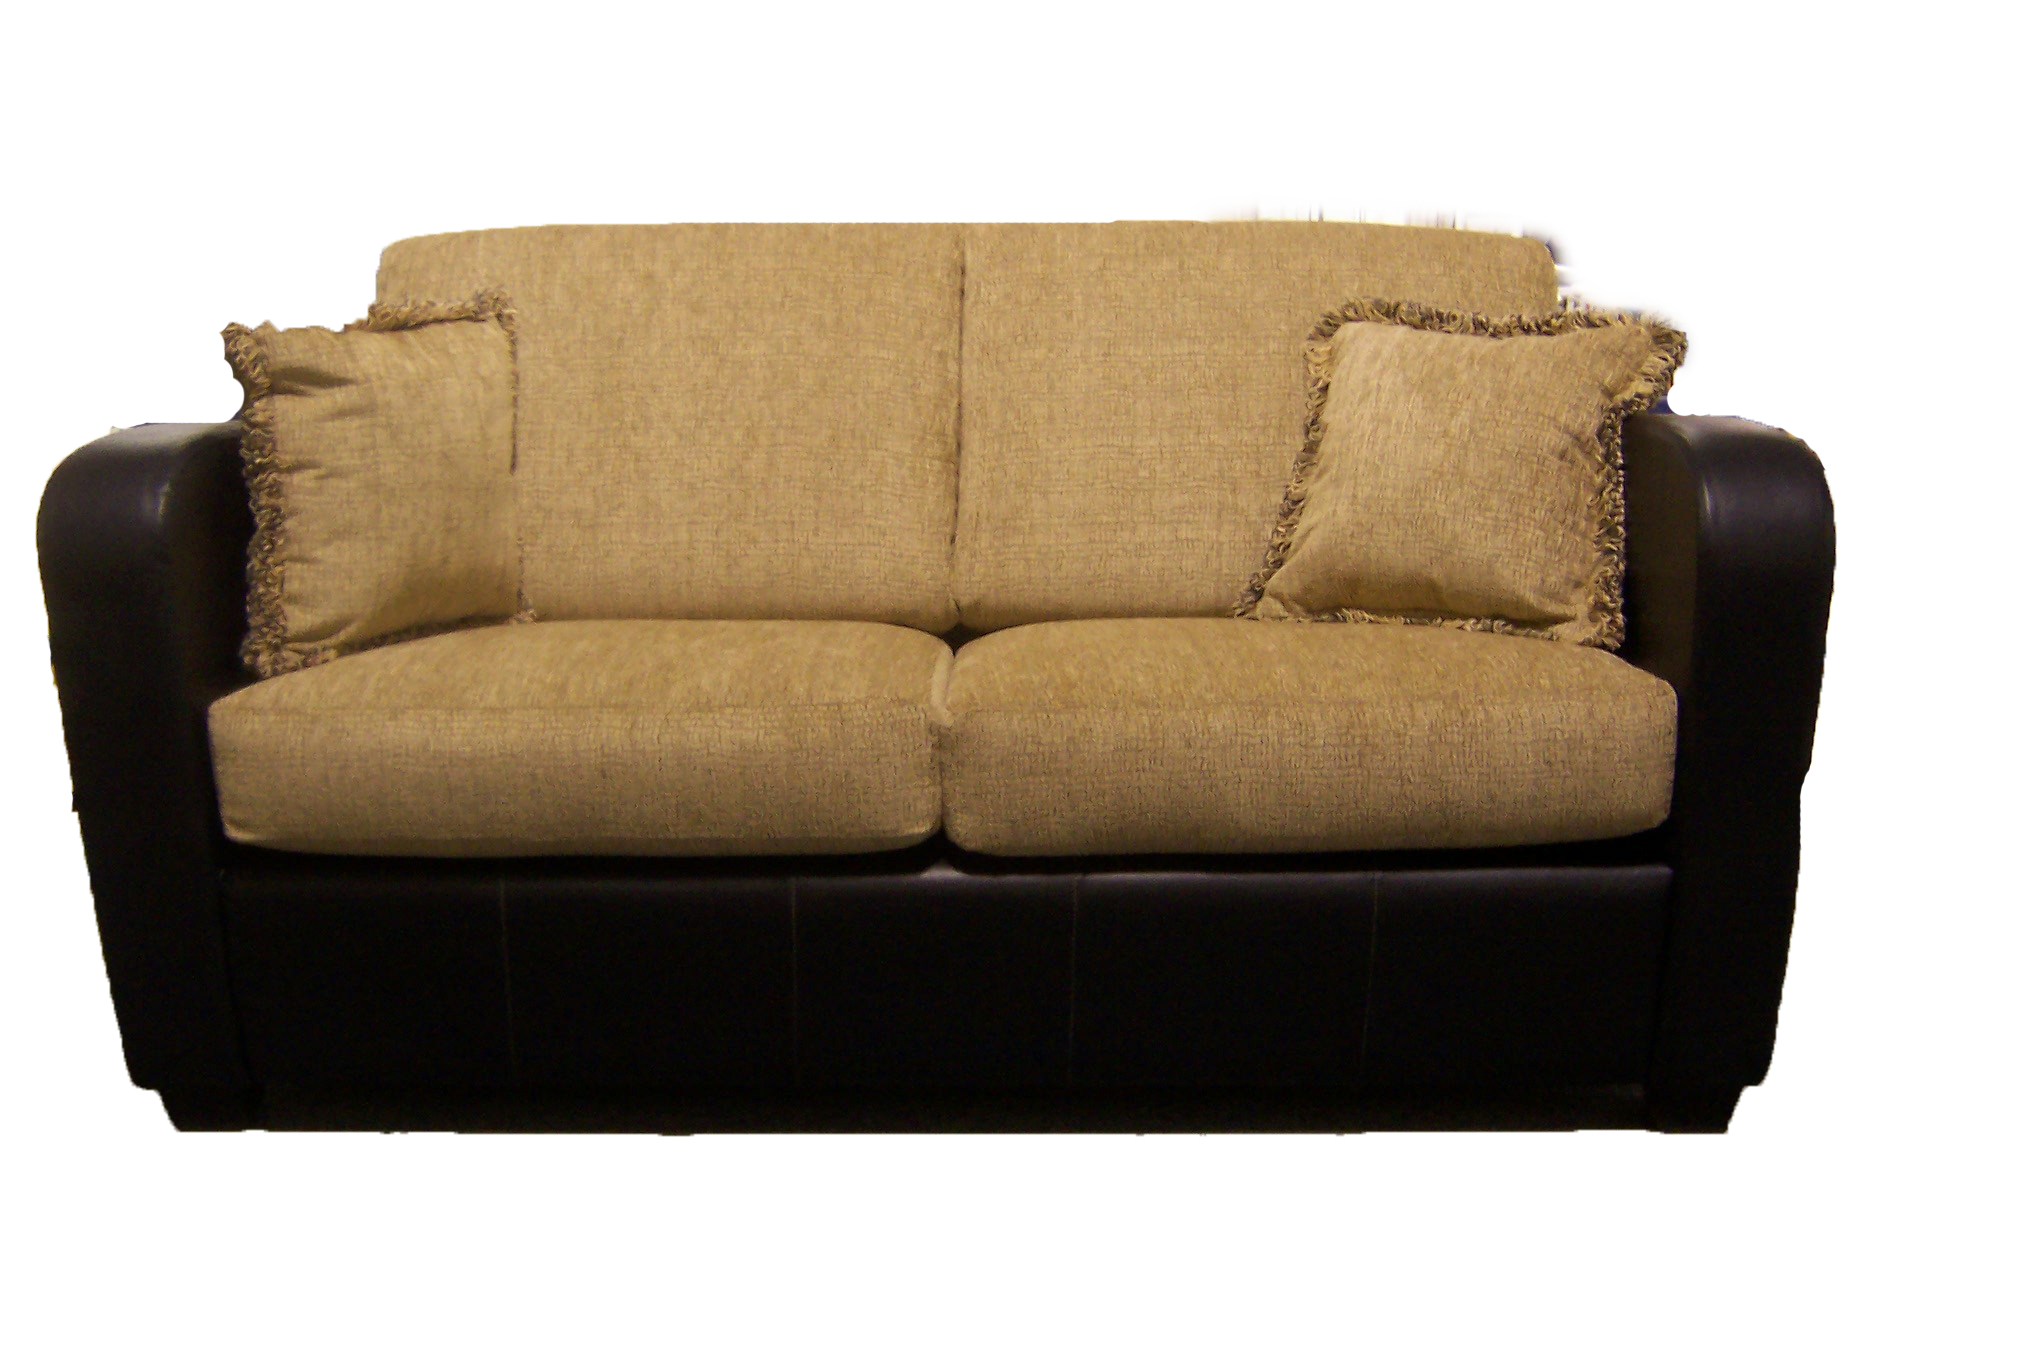 Sofa Png Image - Couch, Transparent background PNG HD thumbnail